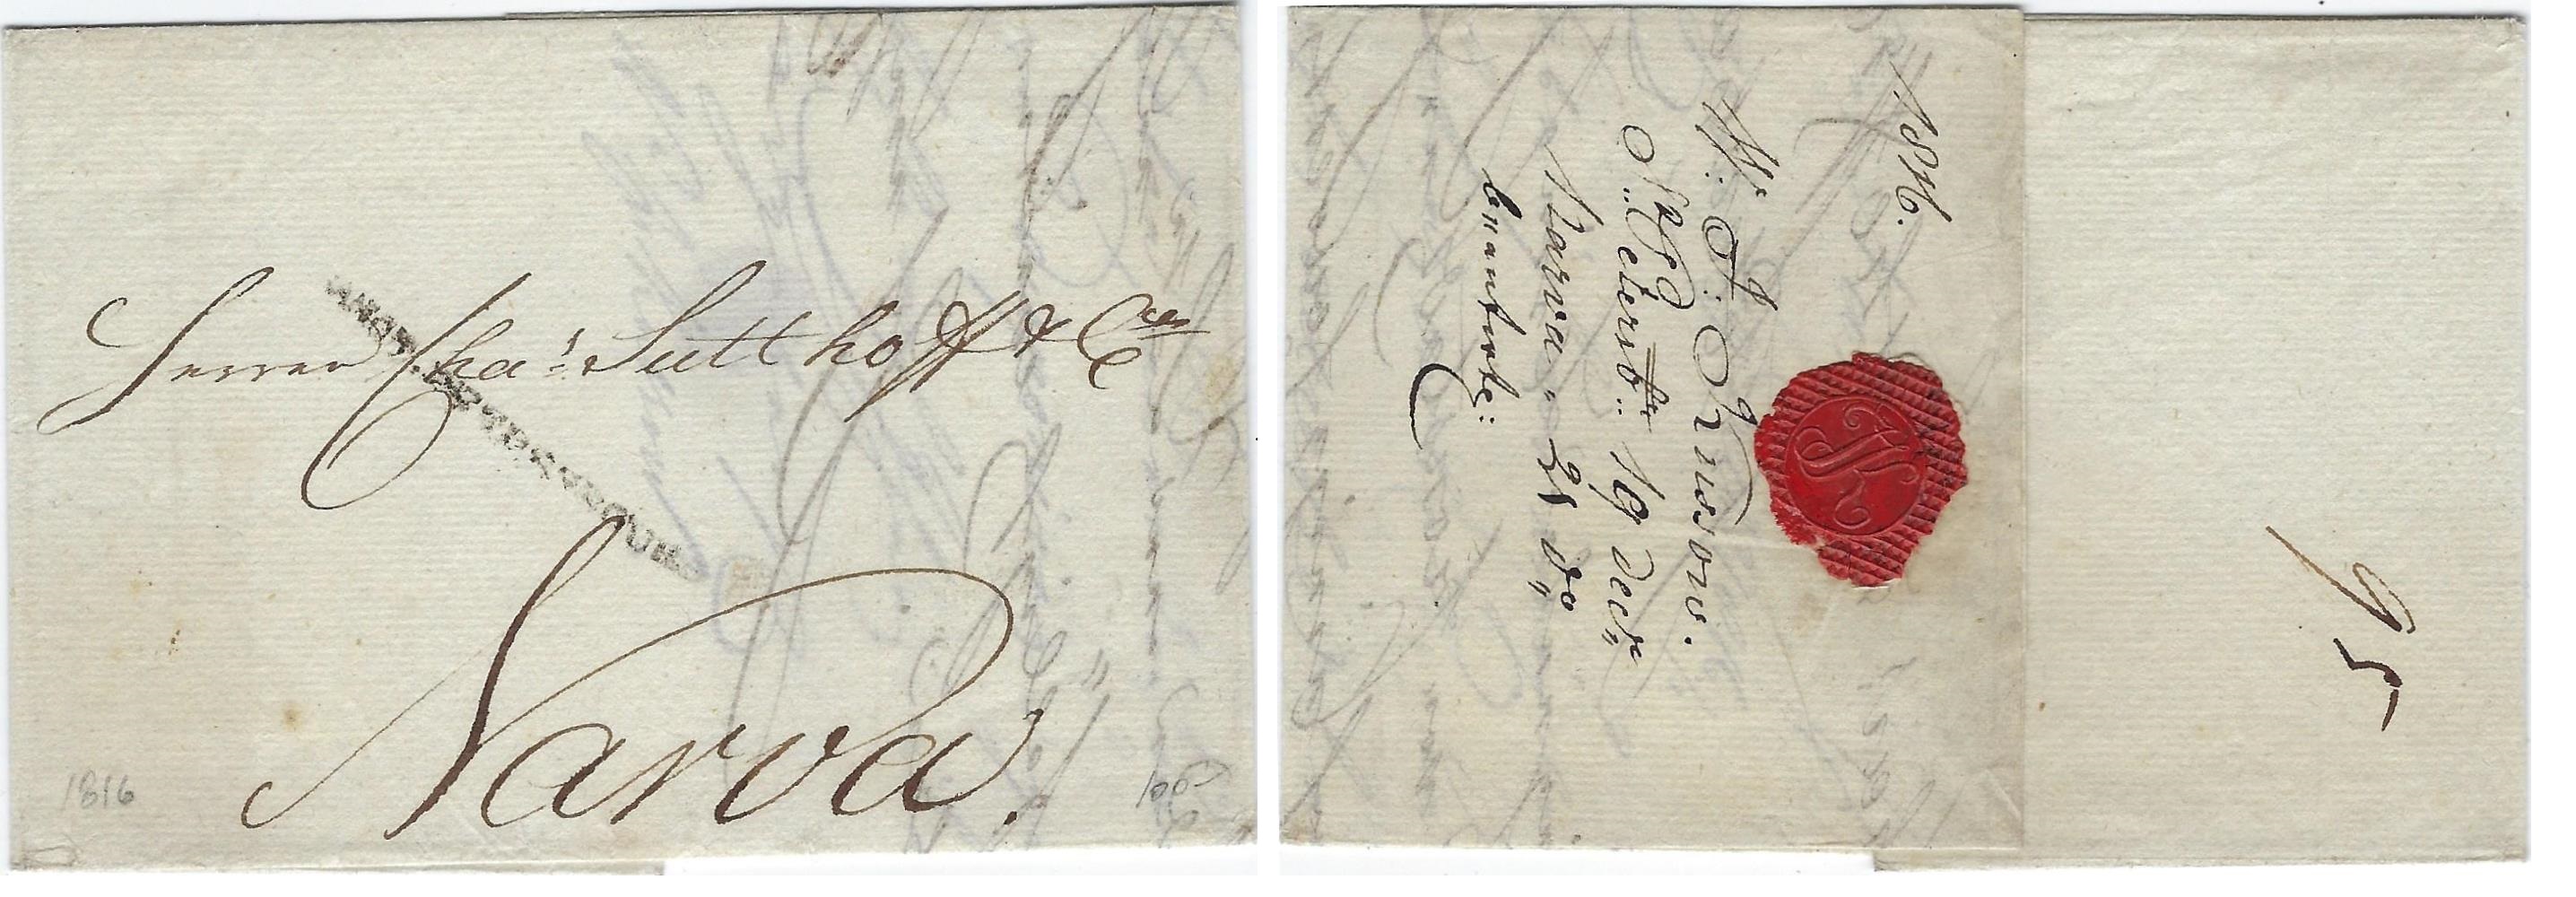 Russia Postal History - Stampless Covers Scott 4001816 